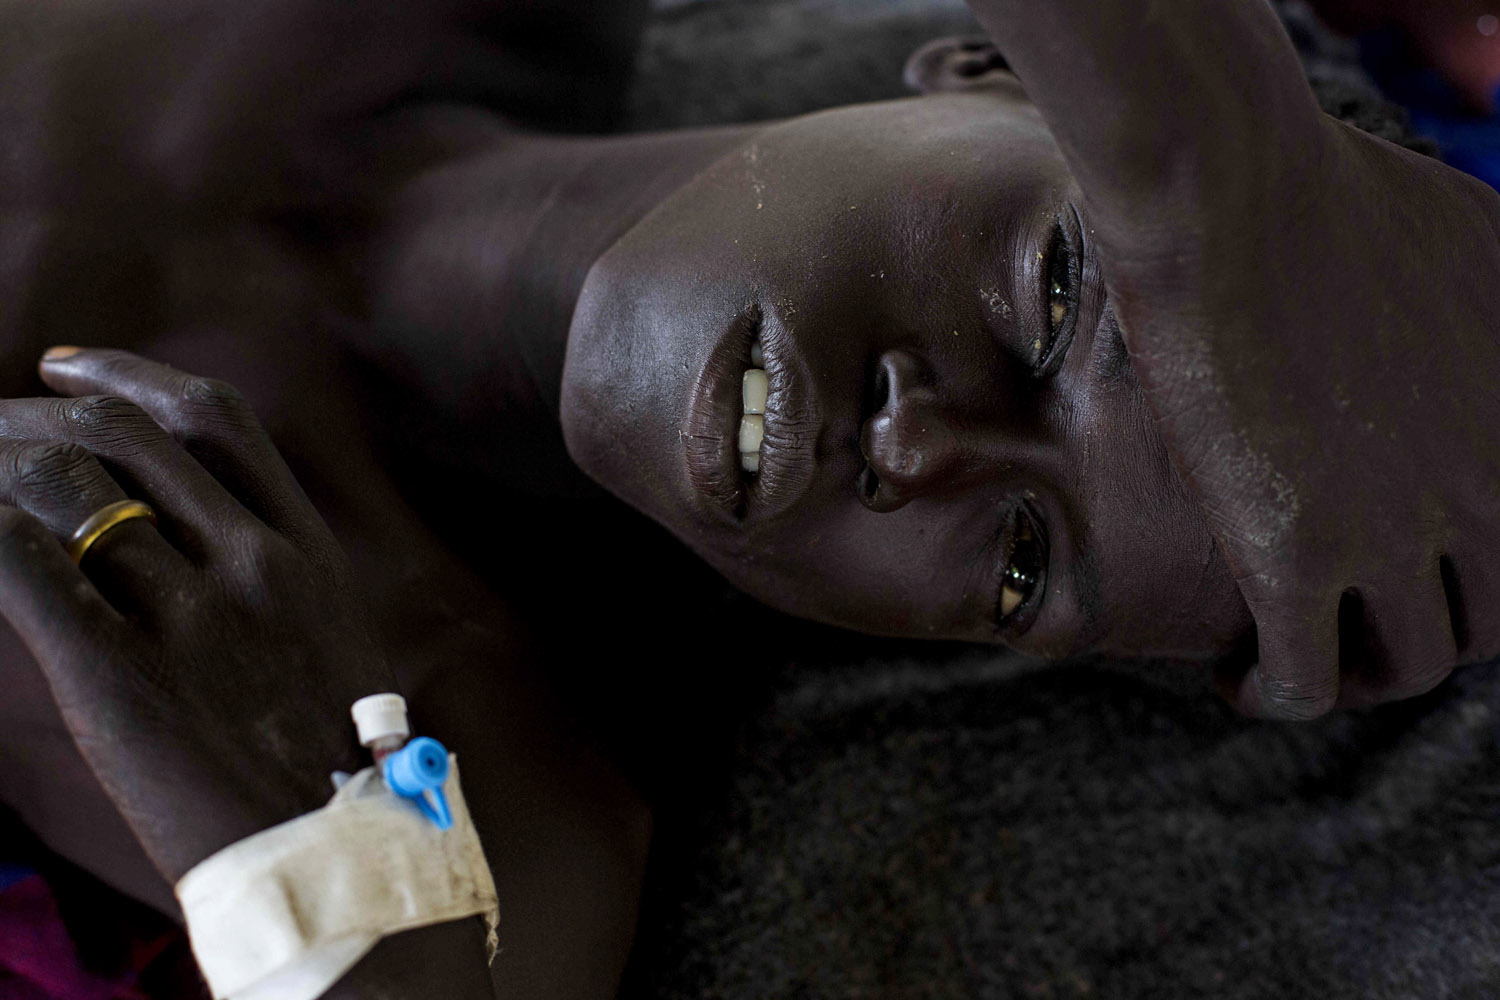 July 15, 2013. A man injured during tribal clashes that erupted in Jonglei State, lies in a hospital in Bor, South Sudan.